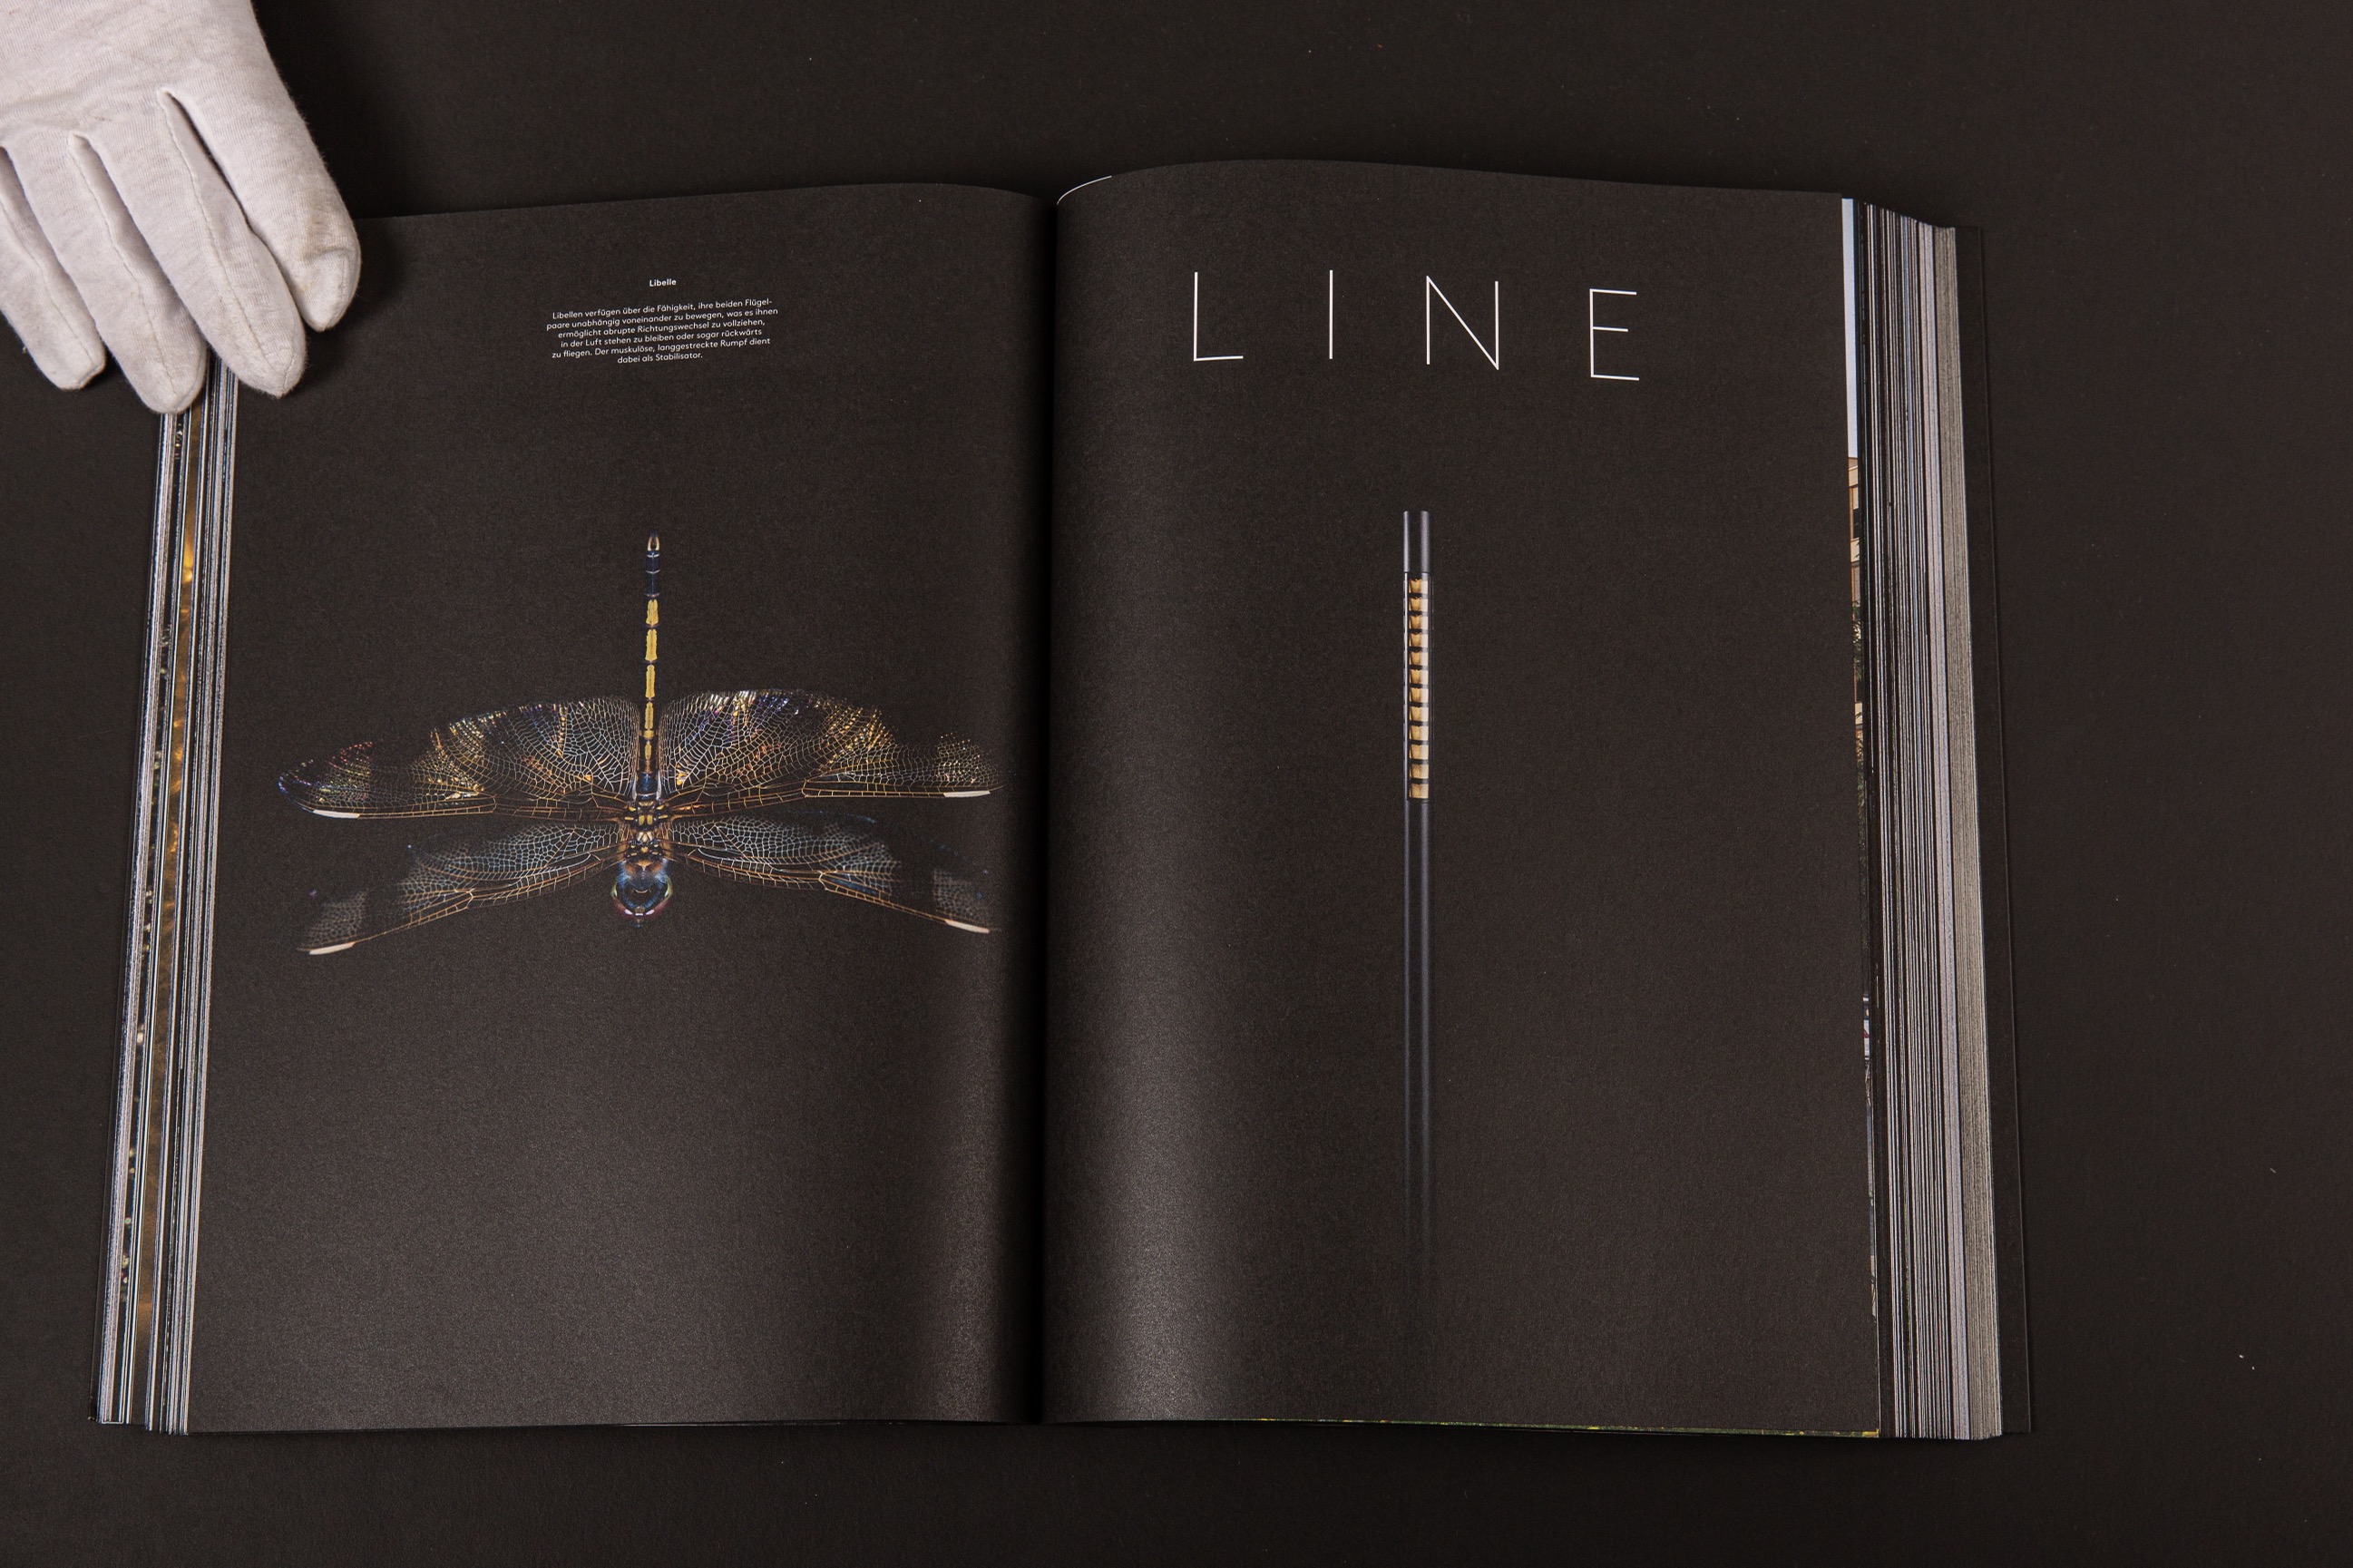 An image of Selux Imagebook, showcasing a double page spread of the opening chapter for Line Luminaire.